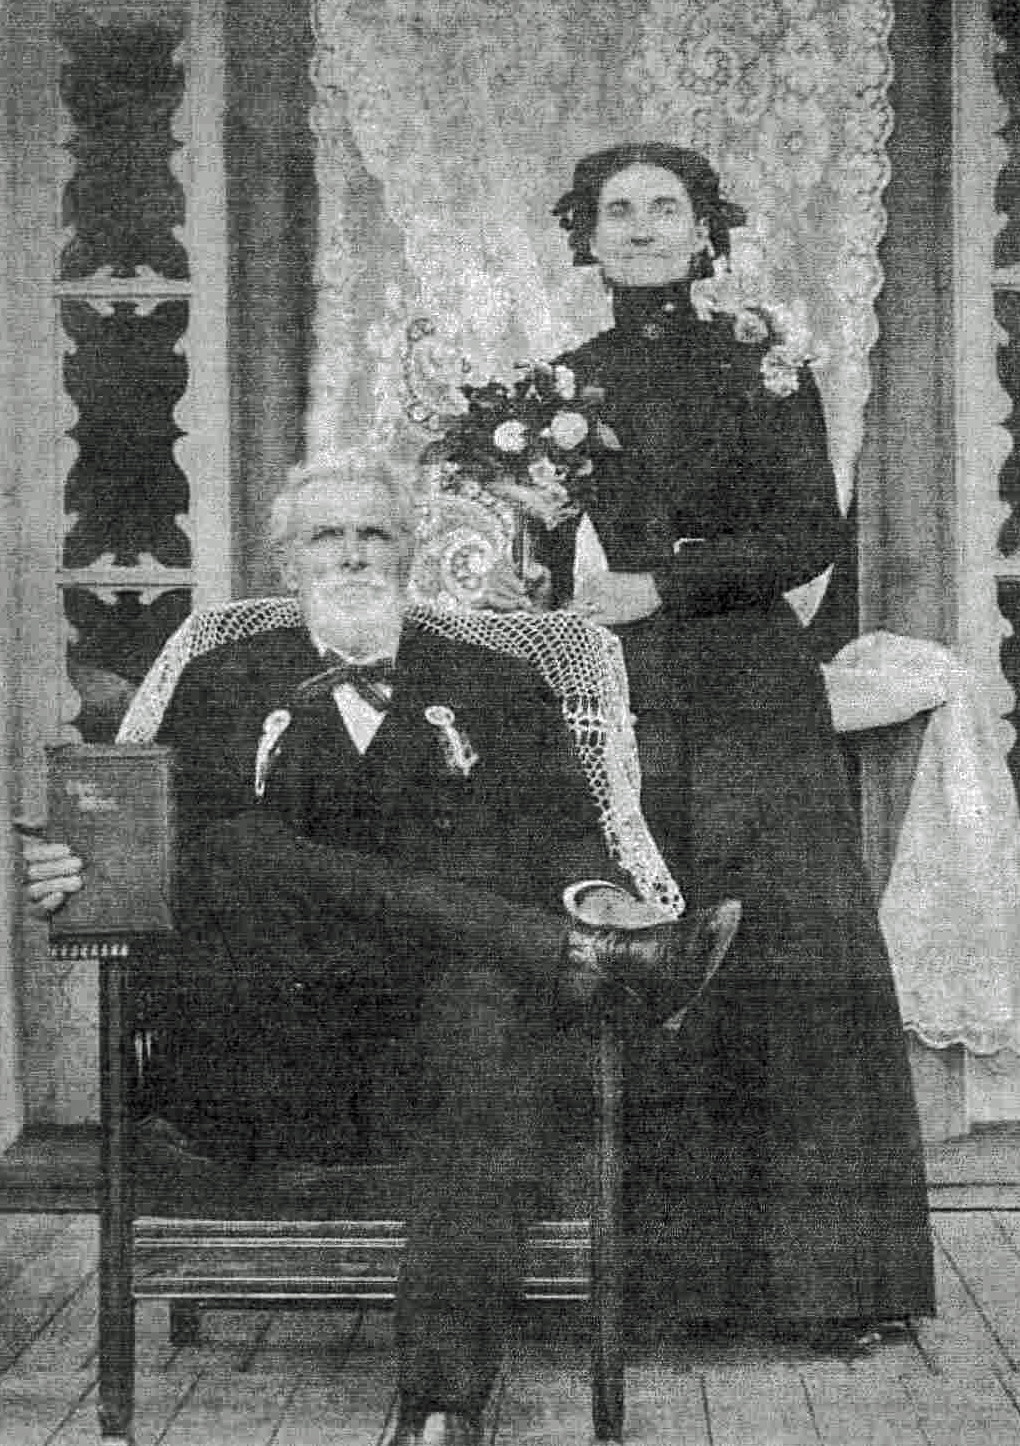 Samuel and Lucy Rogers Sumner